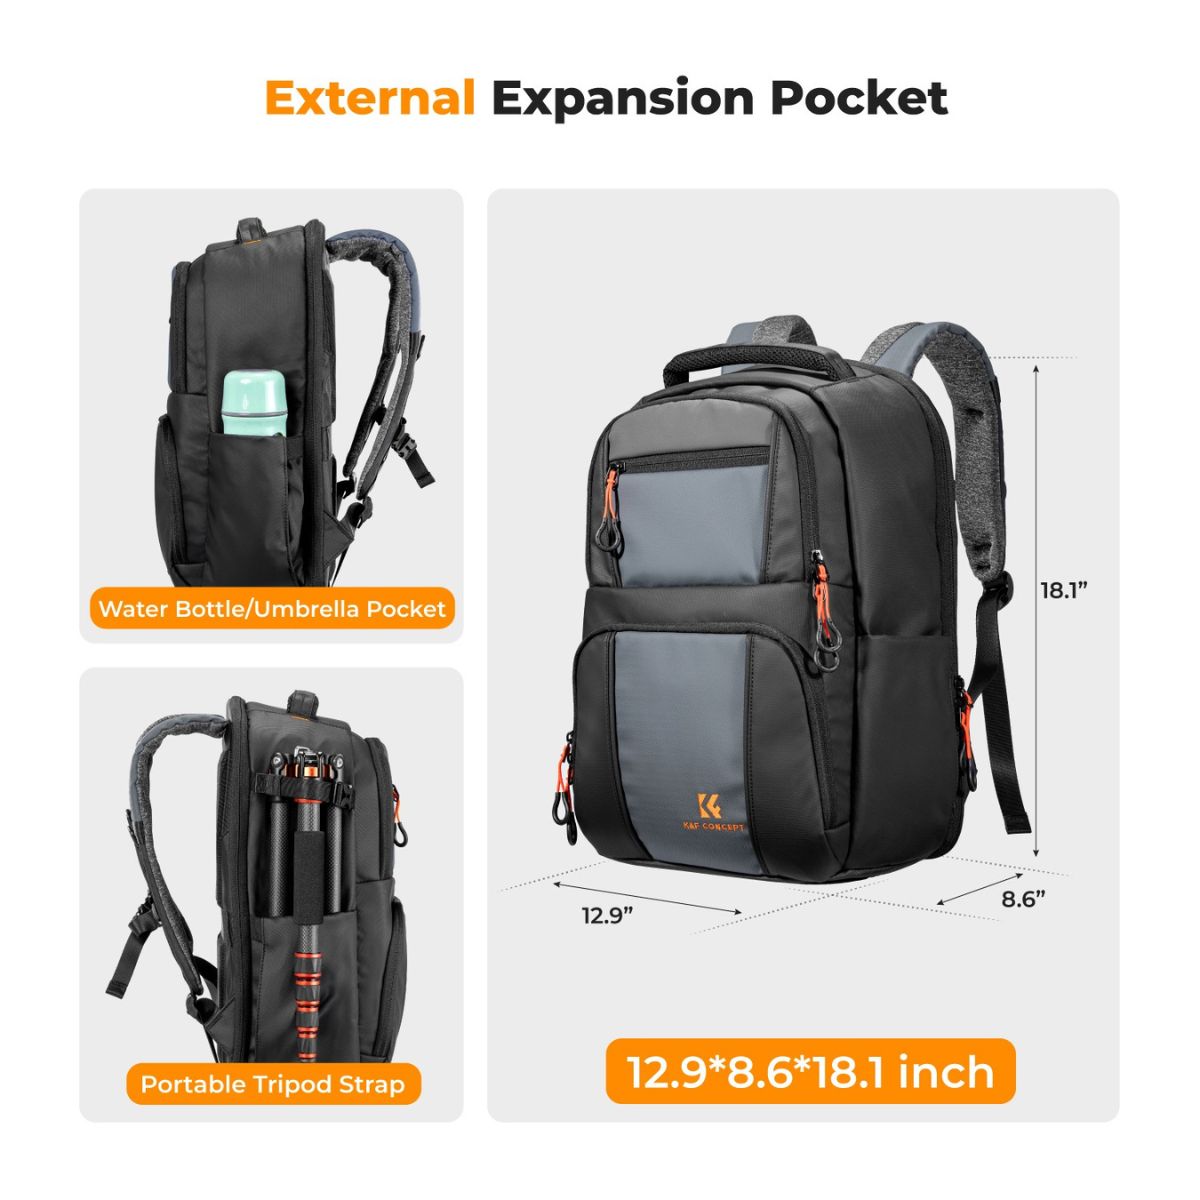 K&F Concept 30L Beta Camera Backpack V2 with 15" Laptop Compartment, Tripod Holder, Quick Side & Rear Access Pockets, Large Capacity Storage Bag for Sony Fujifilm Canon Nikon Lumix DJI, Lens, Battery, Drone, and Photography Accessories